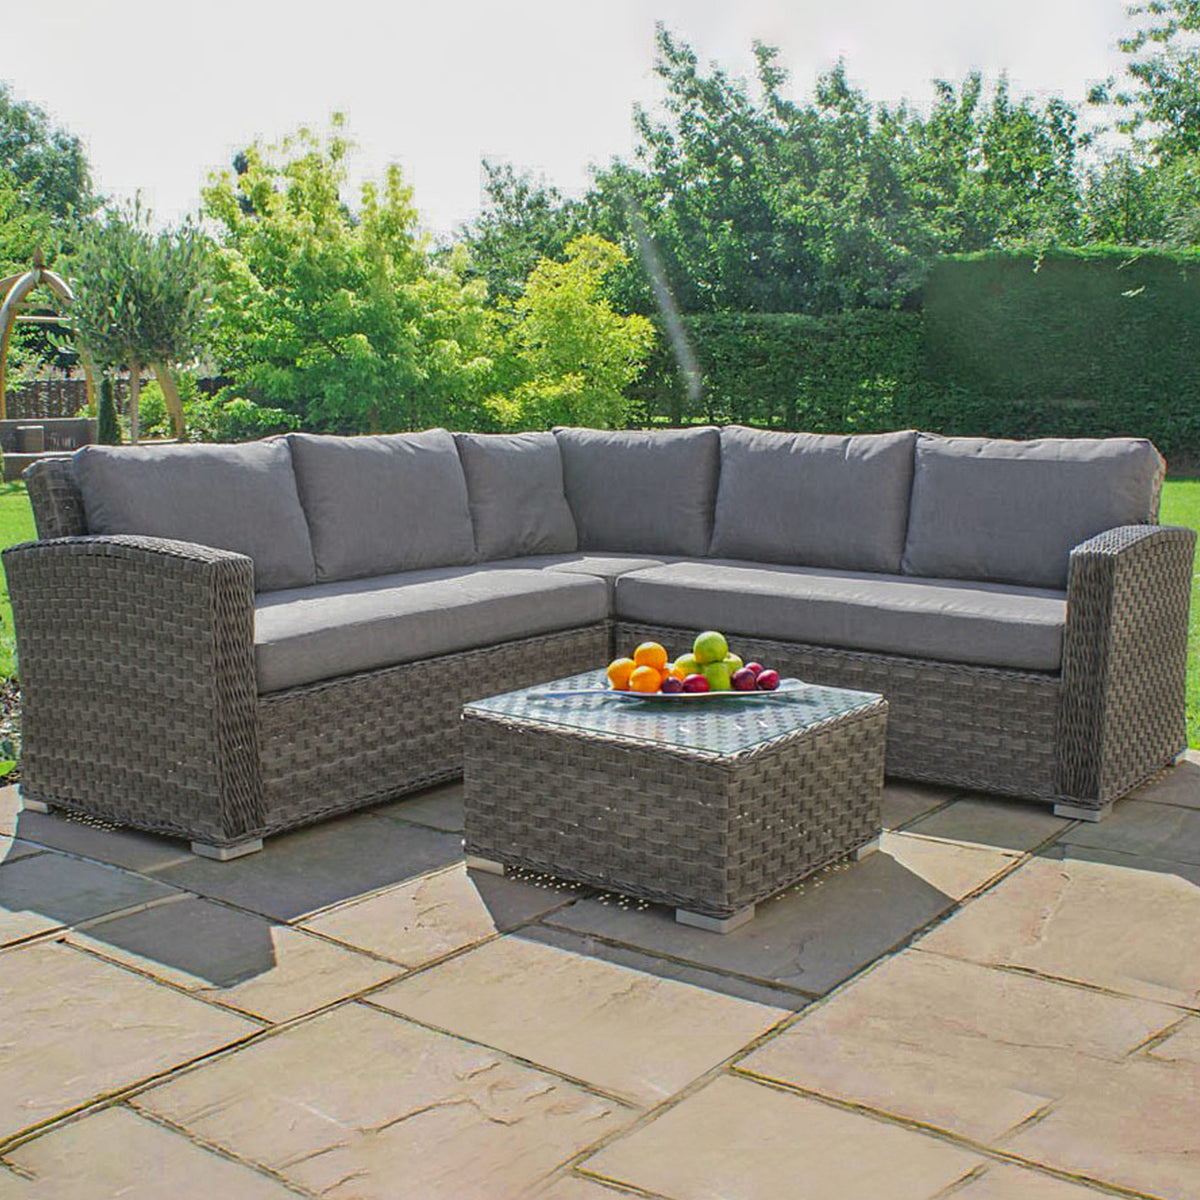 Maze Victoria Small Outdoor Rattan Corner Sofa Group from Roseland Furniture